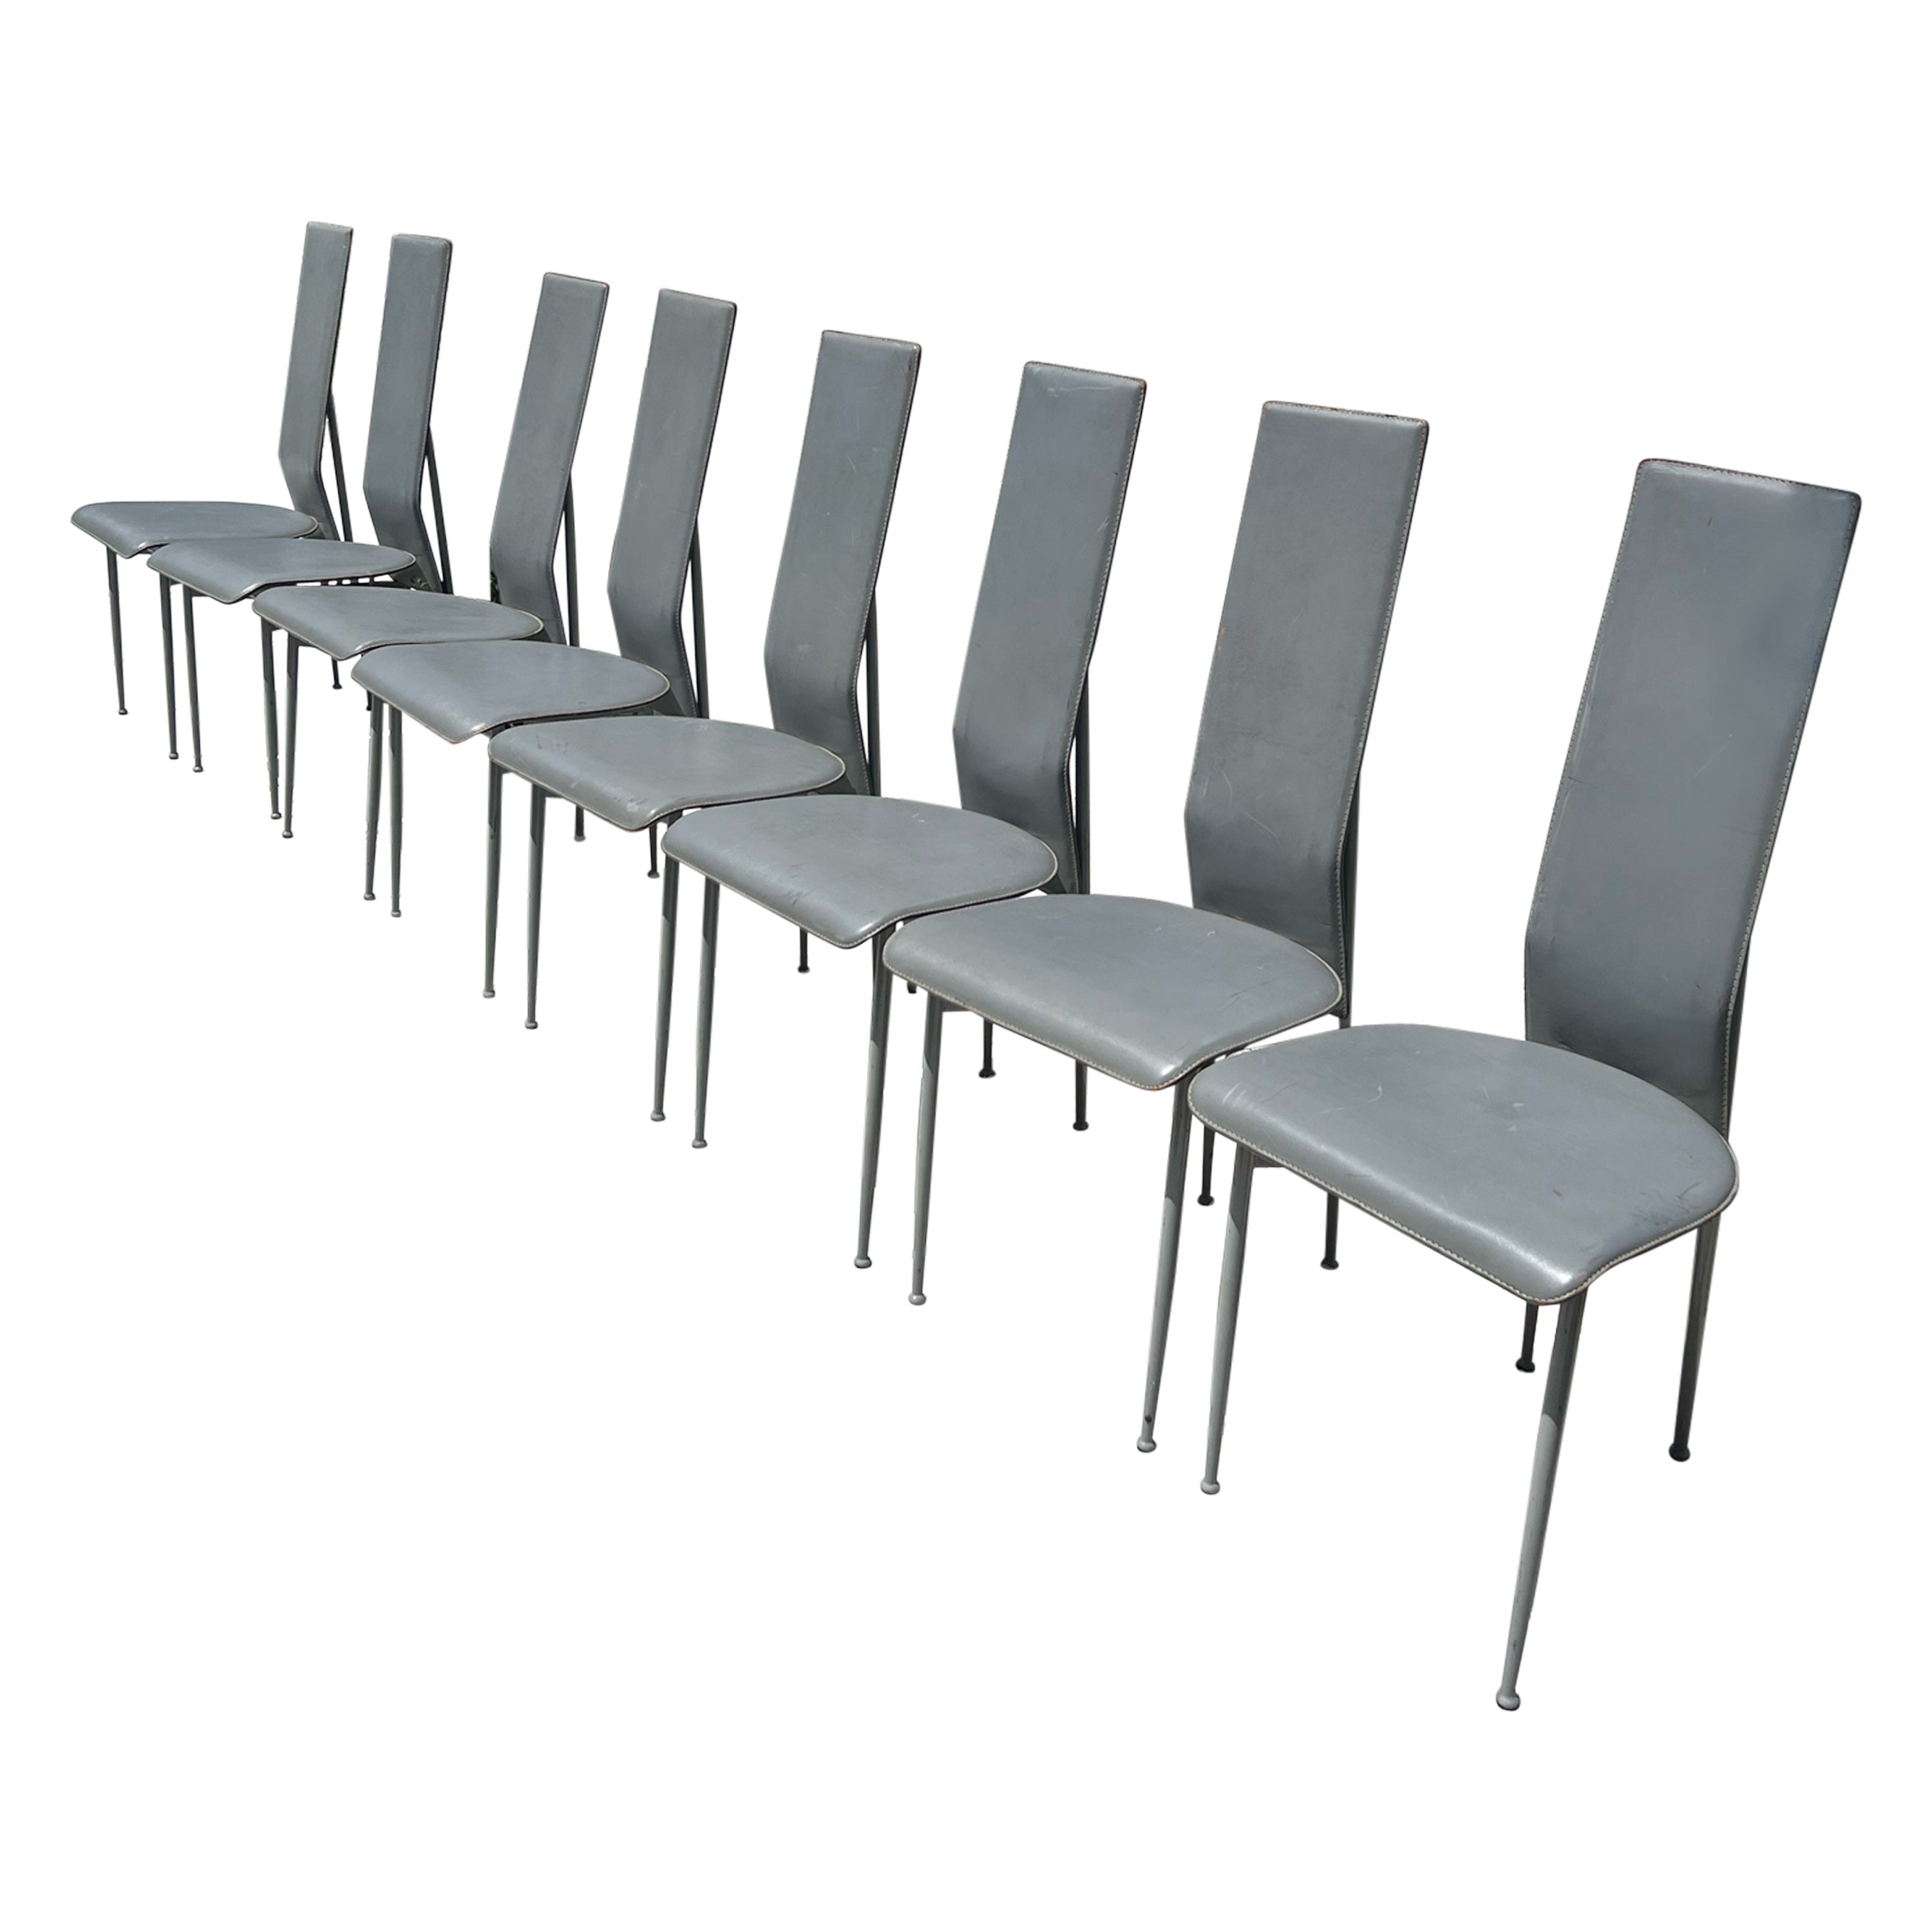 Costantini Style Postmodern Sculptural Dining Chairs in Gray, Set of 8, 1970s